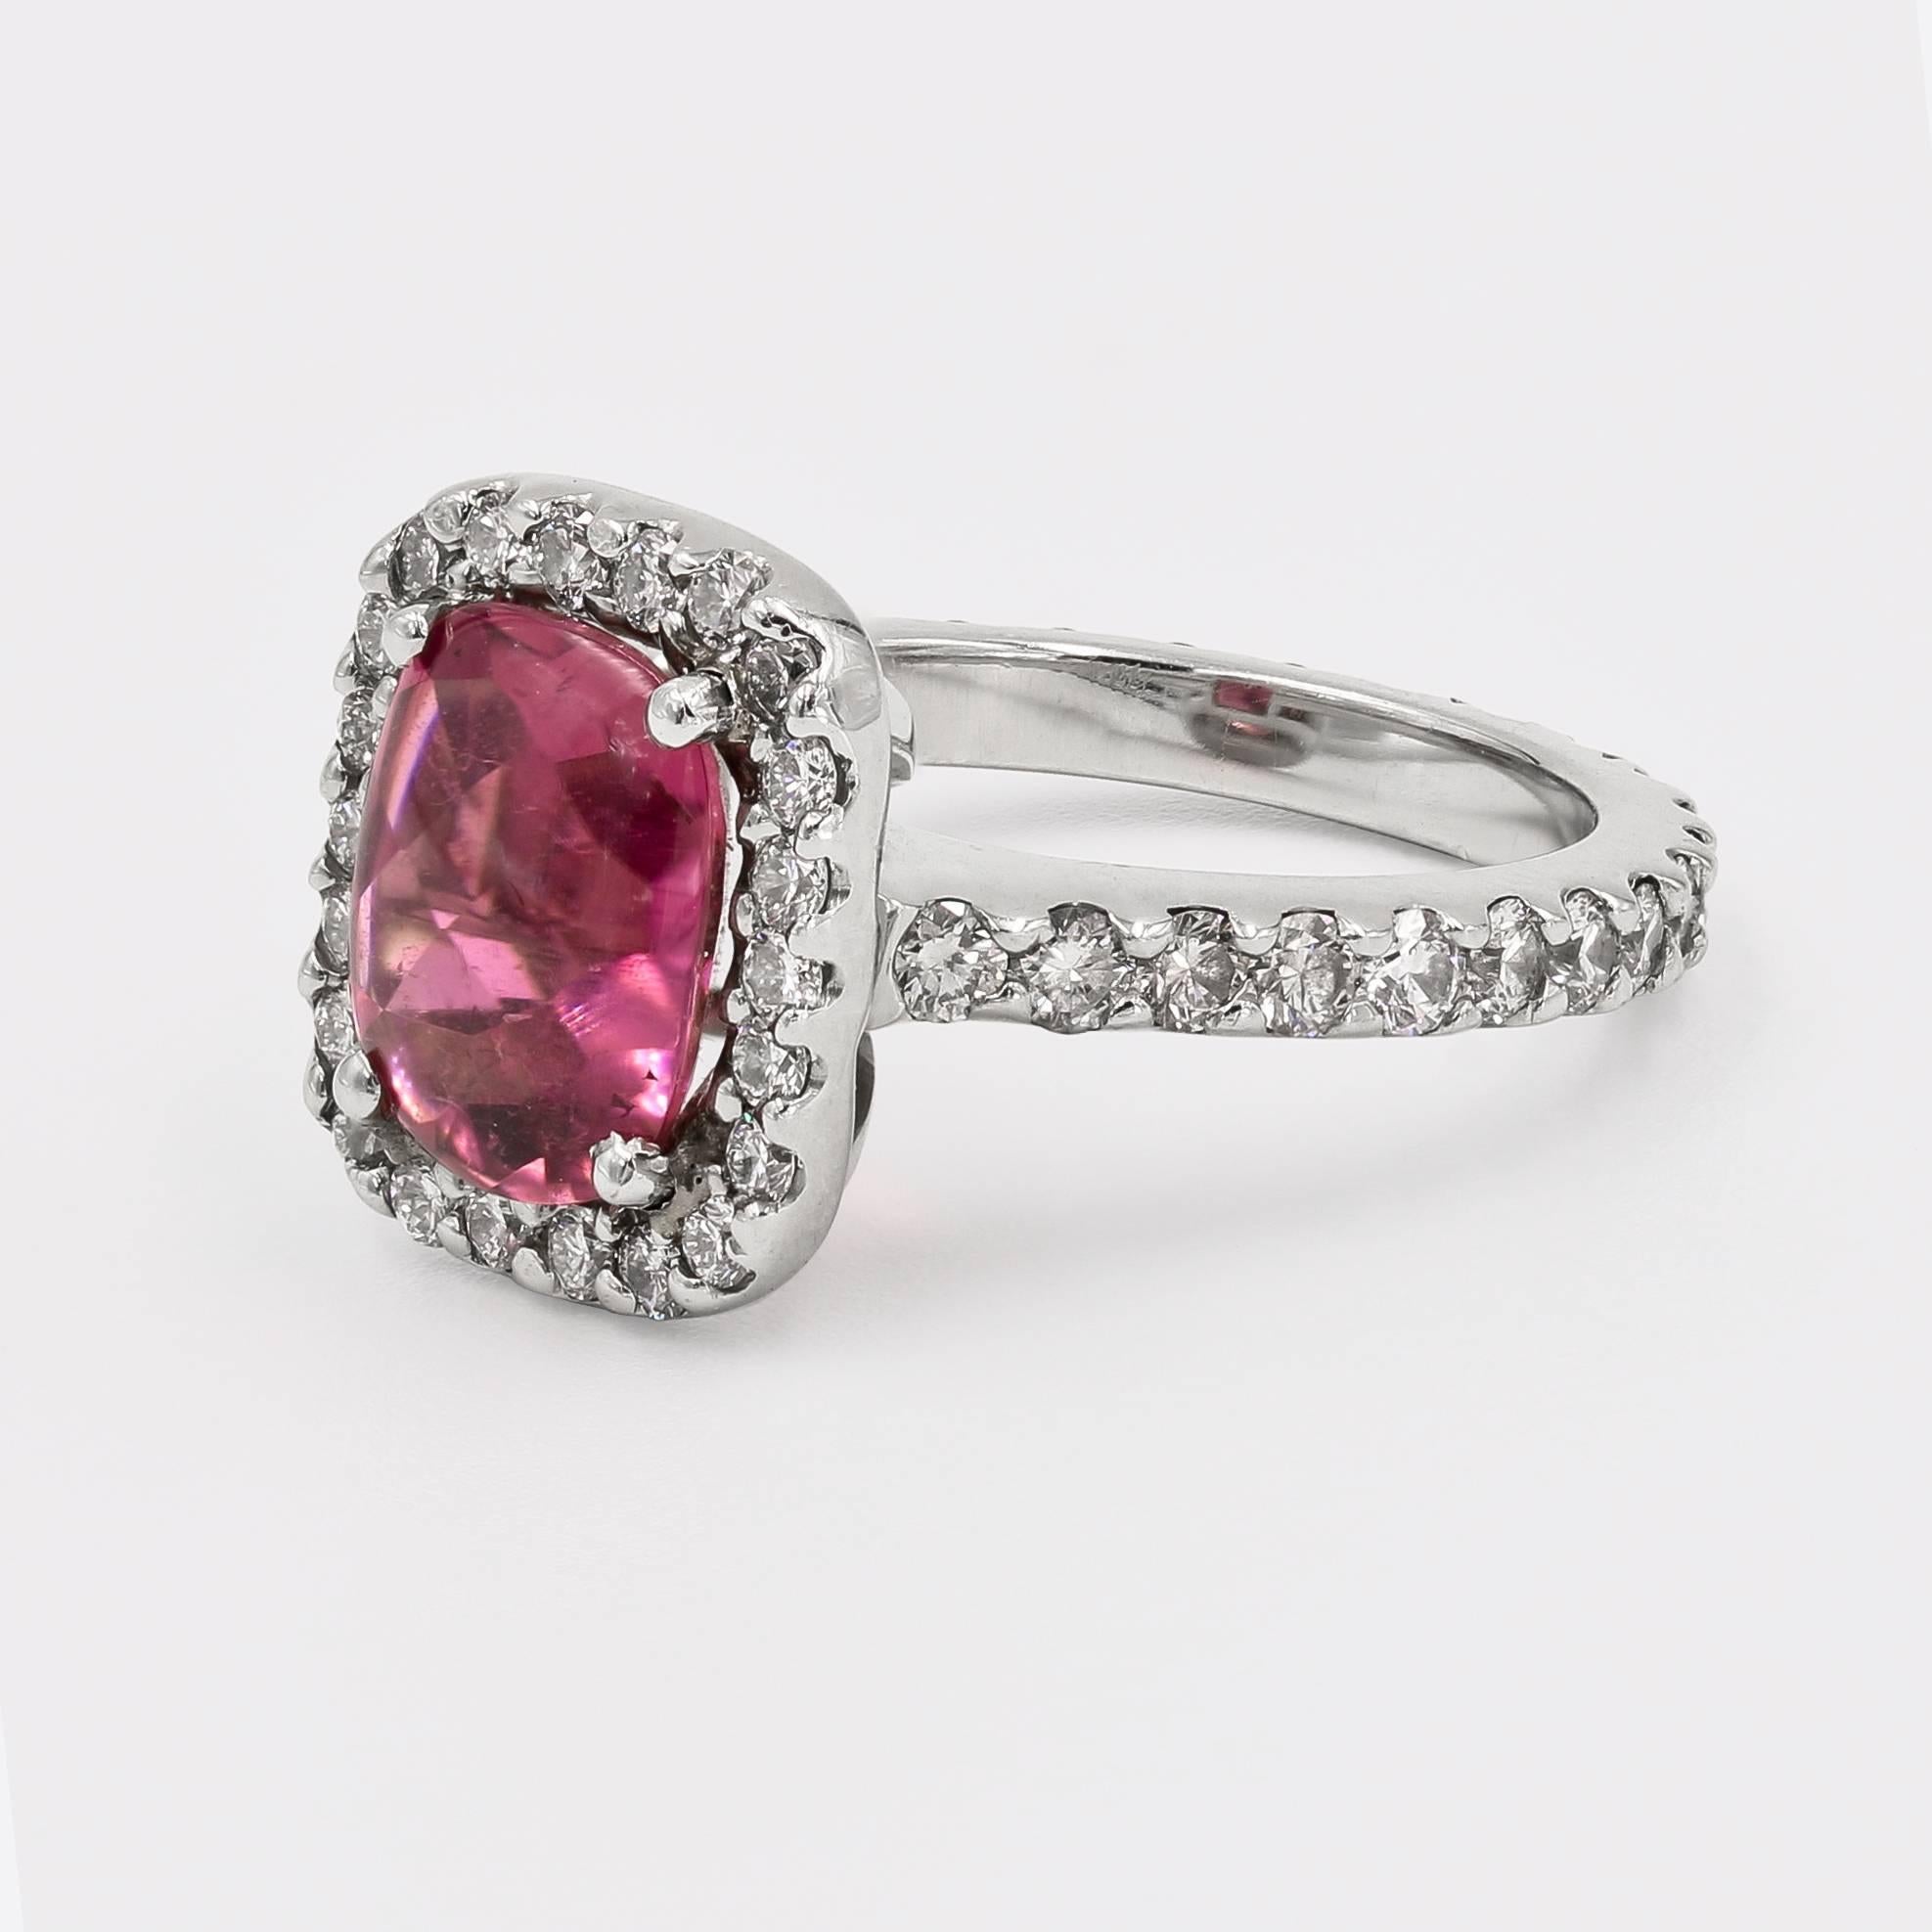 This beautiful platinum ring contains a 2.72cts. cushion shape cabochon cut Rhodolite Garnet center set in a halo style setting. Around the center and the entire shank are 48 ideal cut round diamonds=  1.19cts. t.w. (diamonds are G/VS)

Finger size